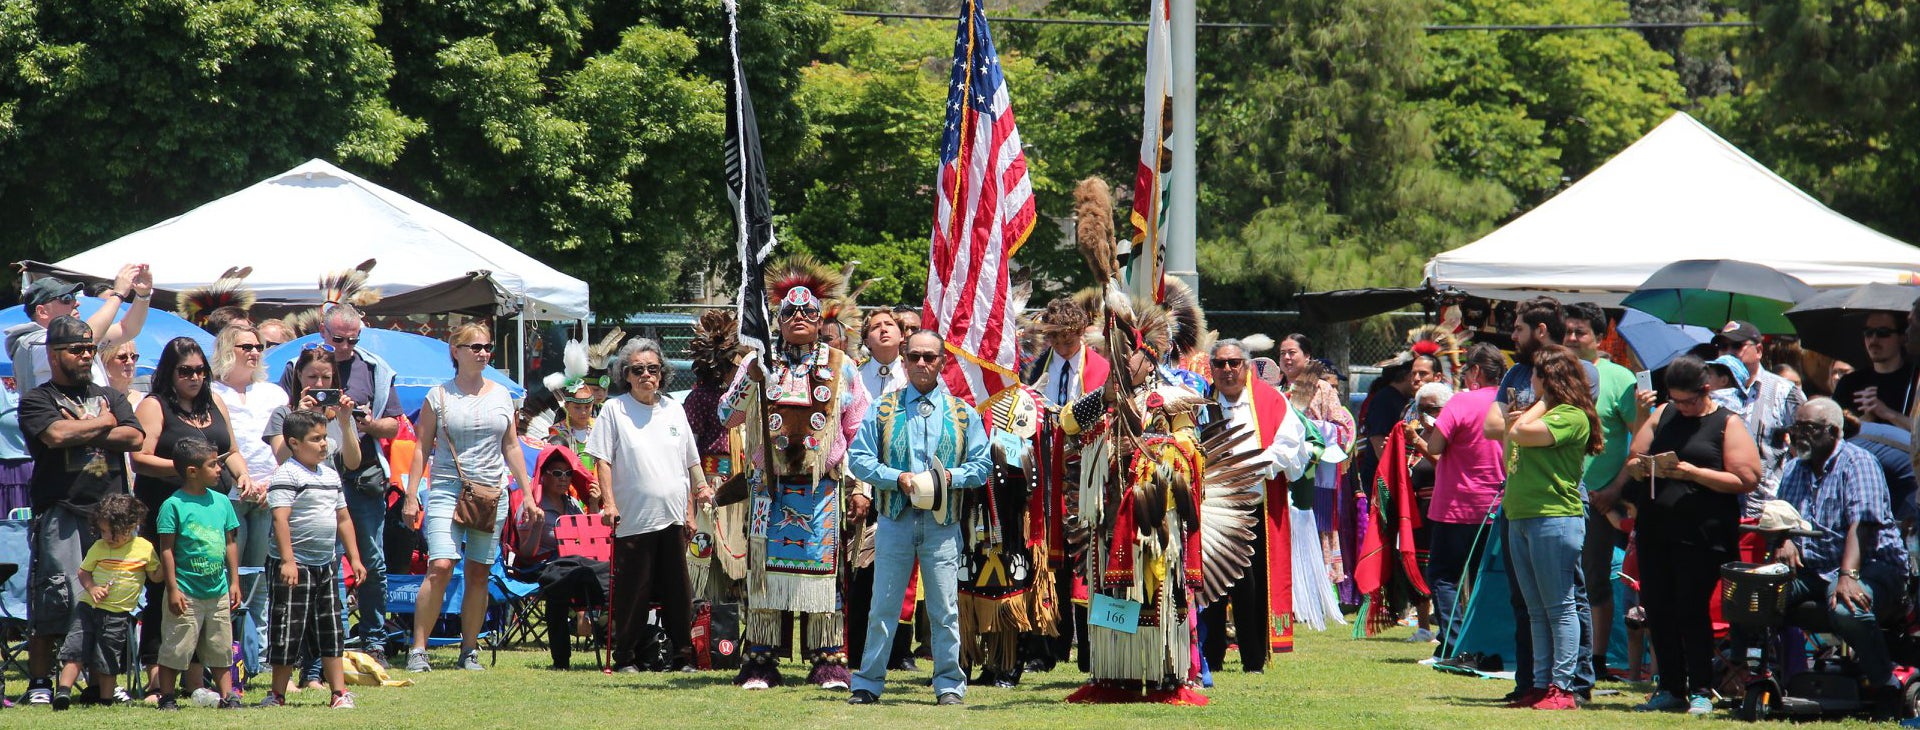 2019 UCR Pow Wow Grand Entry